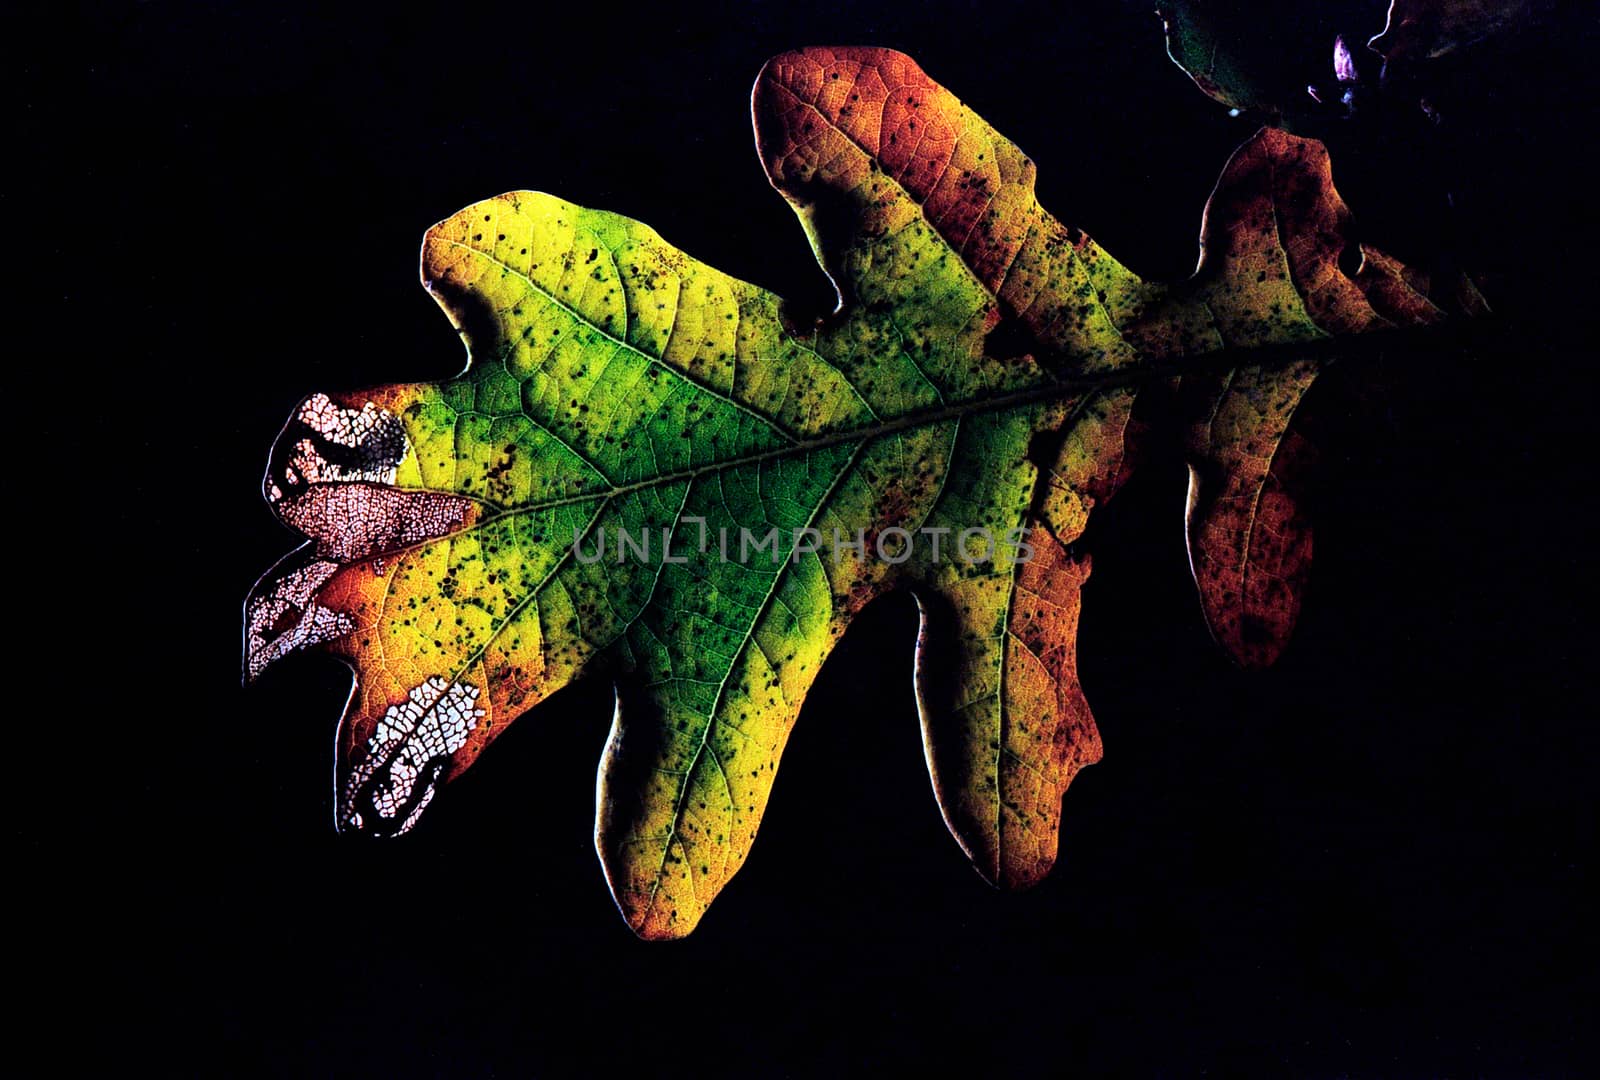 Leaf with light shinning through by Youri